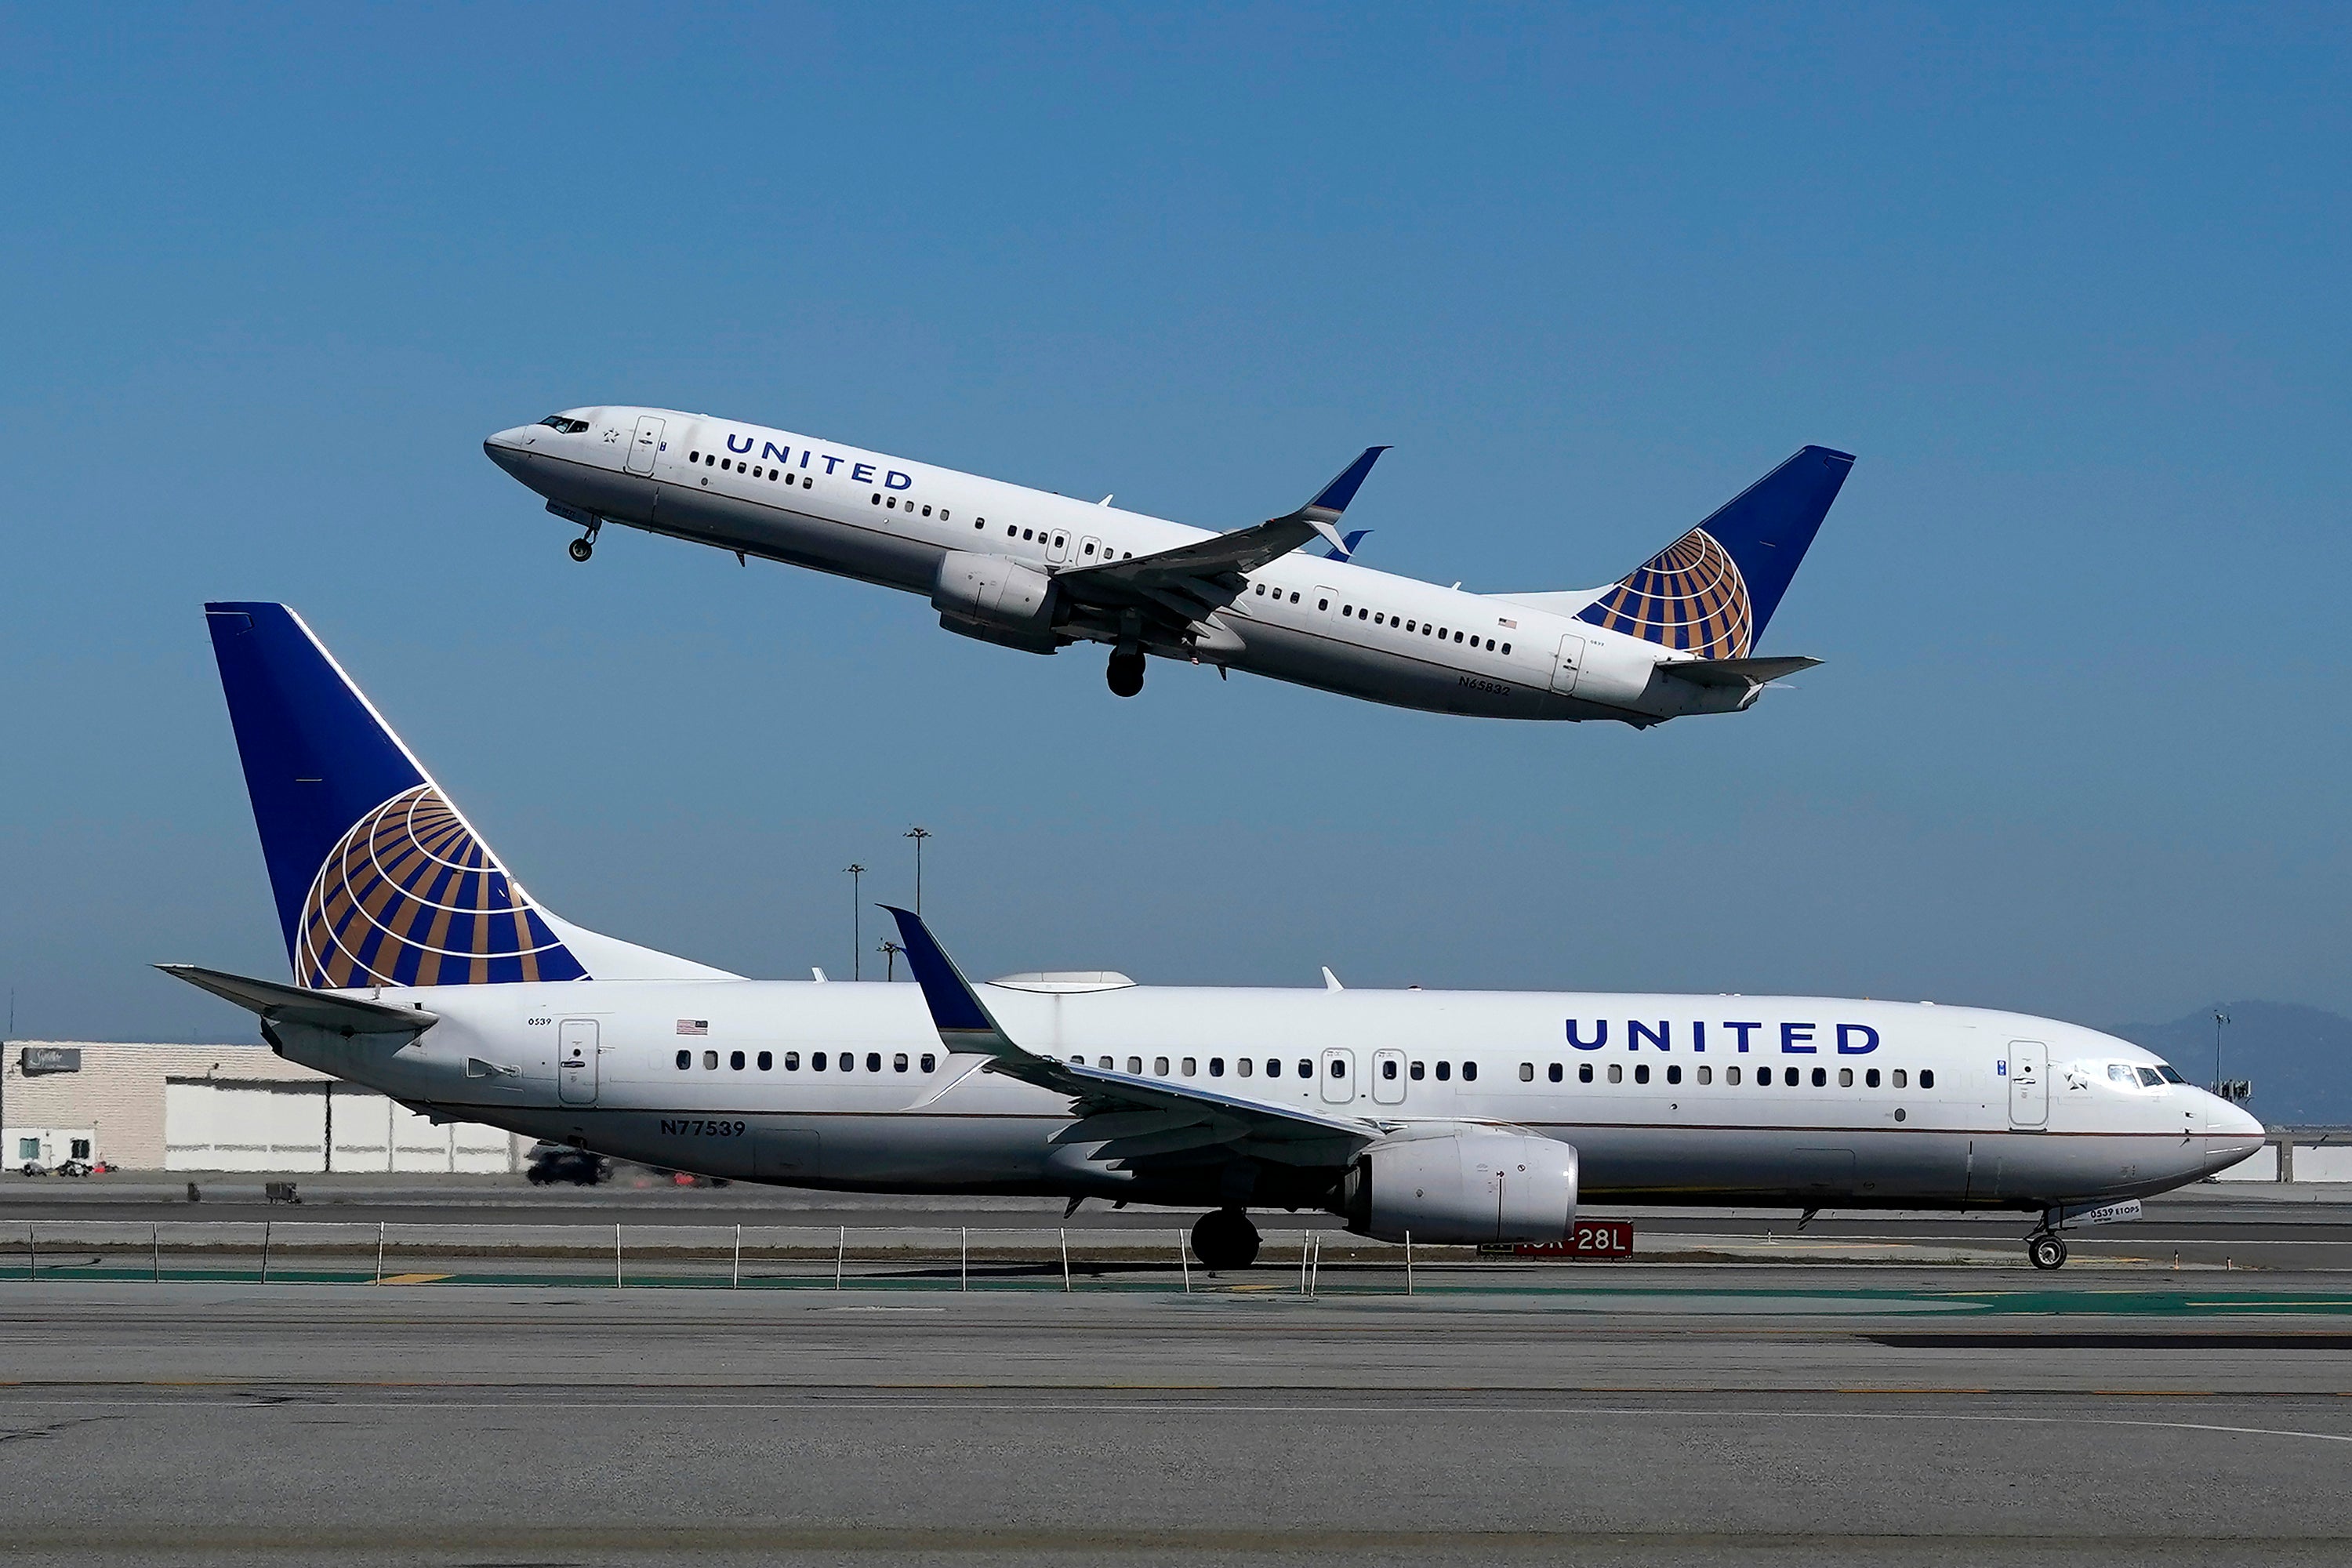 File: The LA bound aircraft of the United Airlines was diverted to Denver